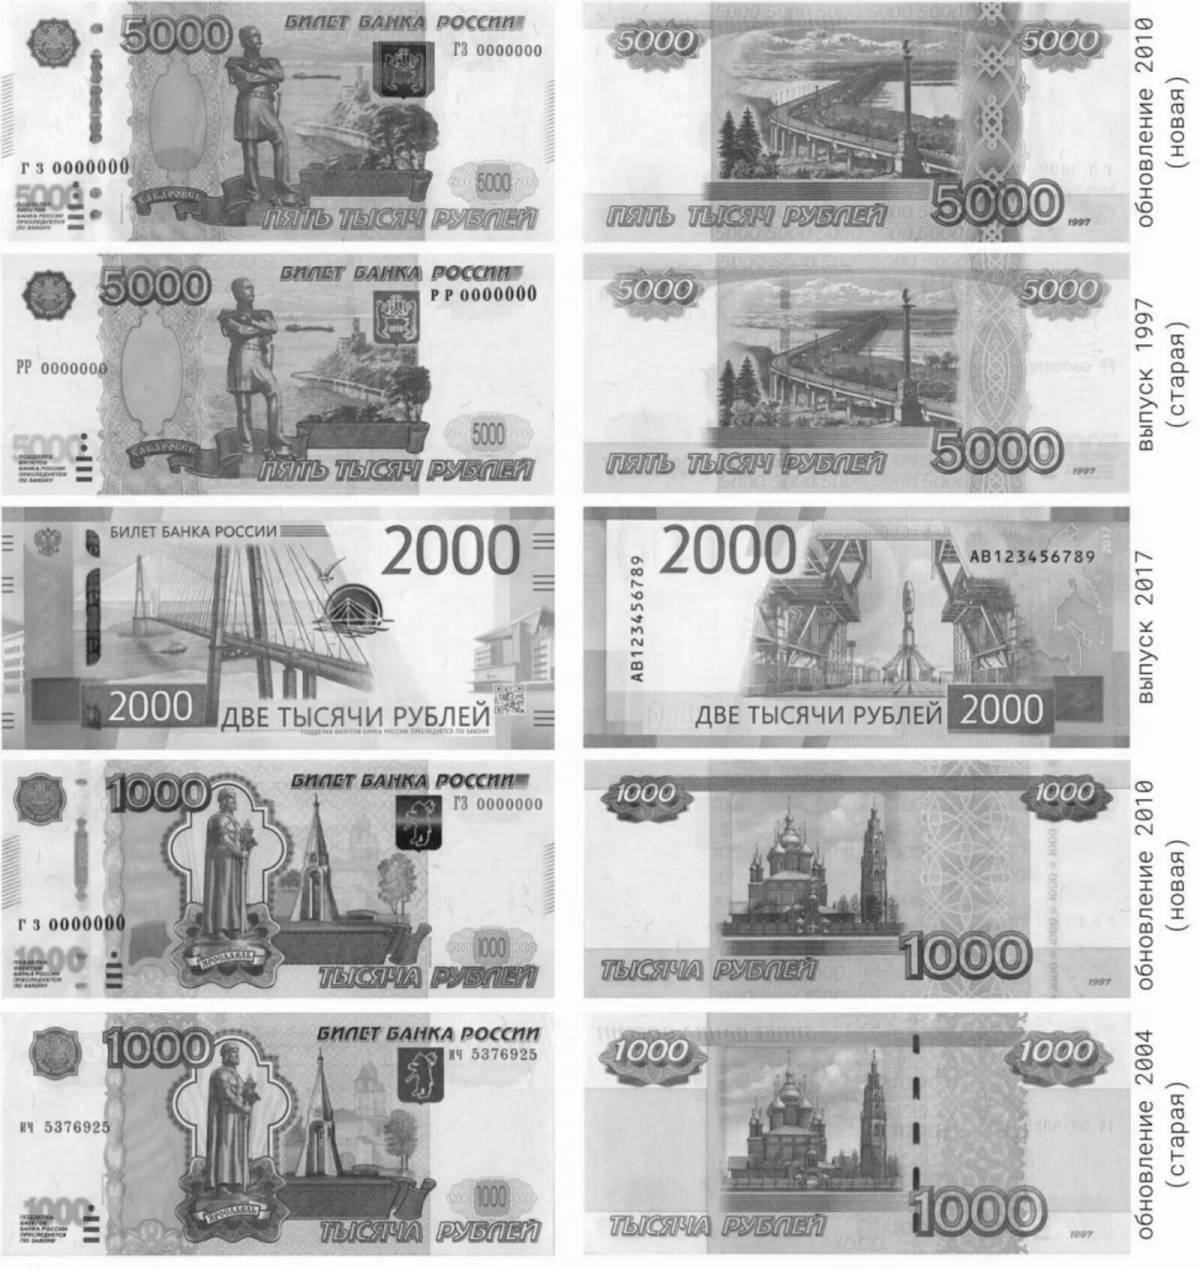 5000 rubles #3